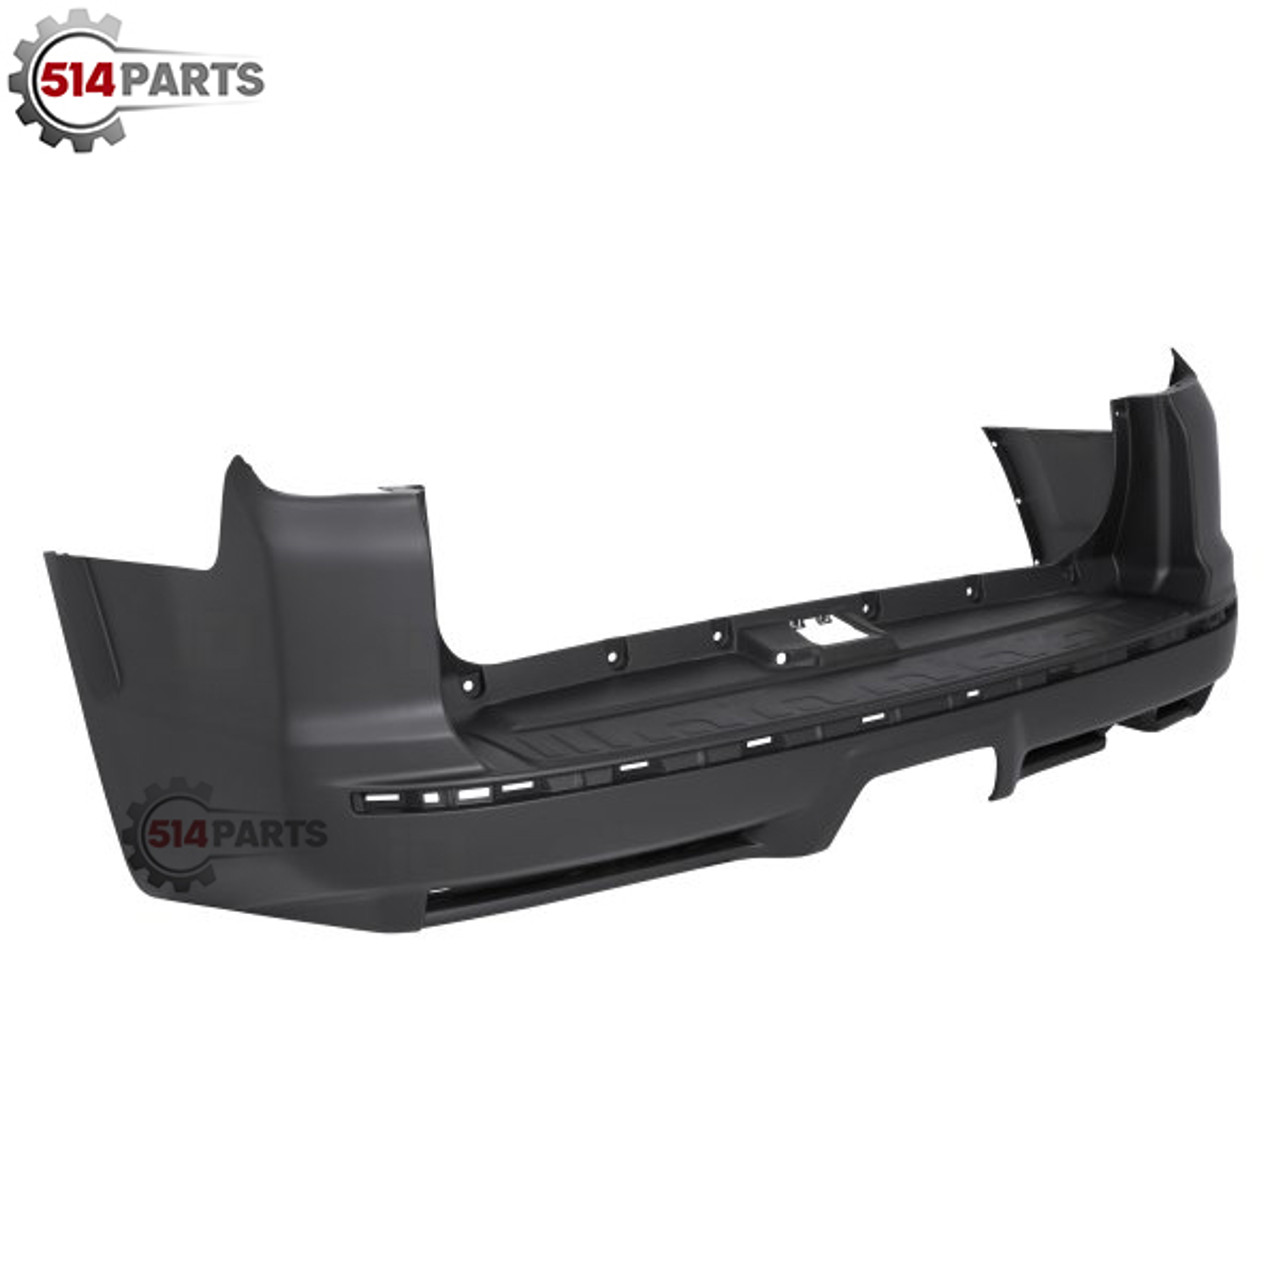 2014 - 2019 TOYOTA 4Runner TRAIL AND OFFROAD MODELS without CHROME TRIM PRIMED REAR BUMPER COVER with HOLE - PARE-CHOC ARRIER PRIME